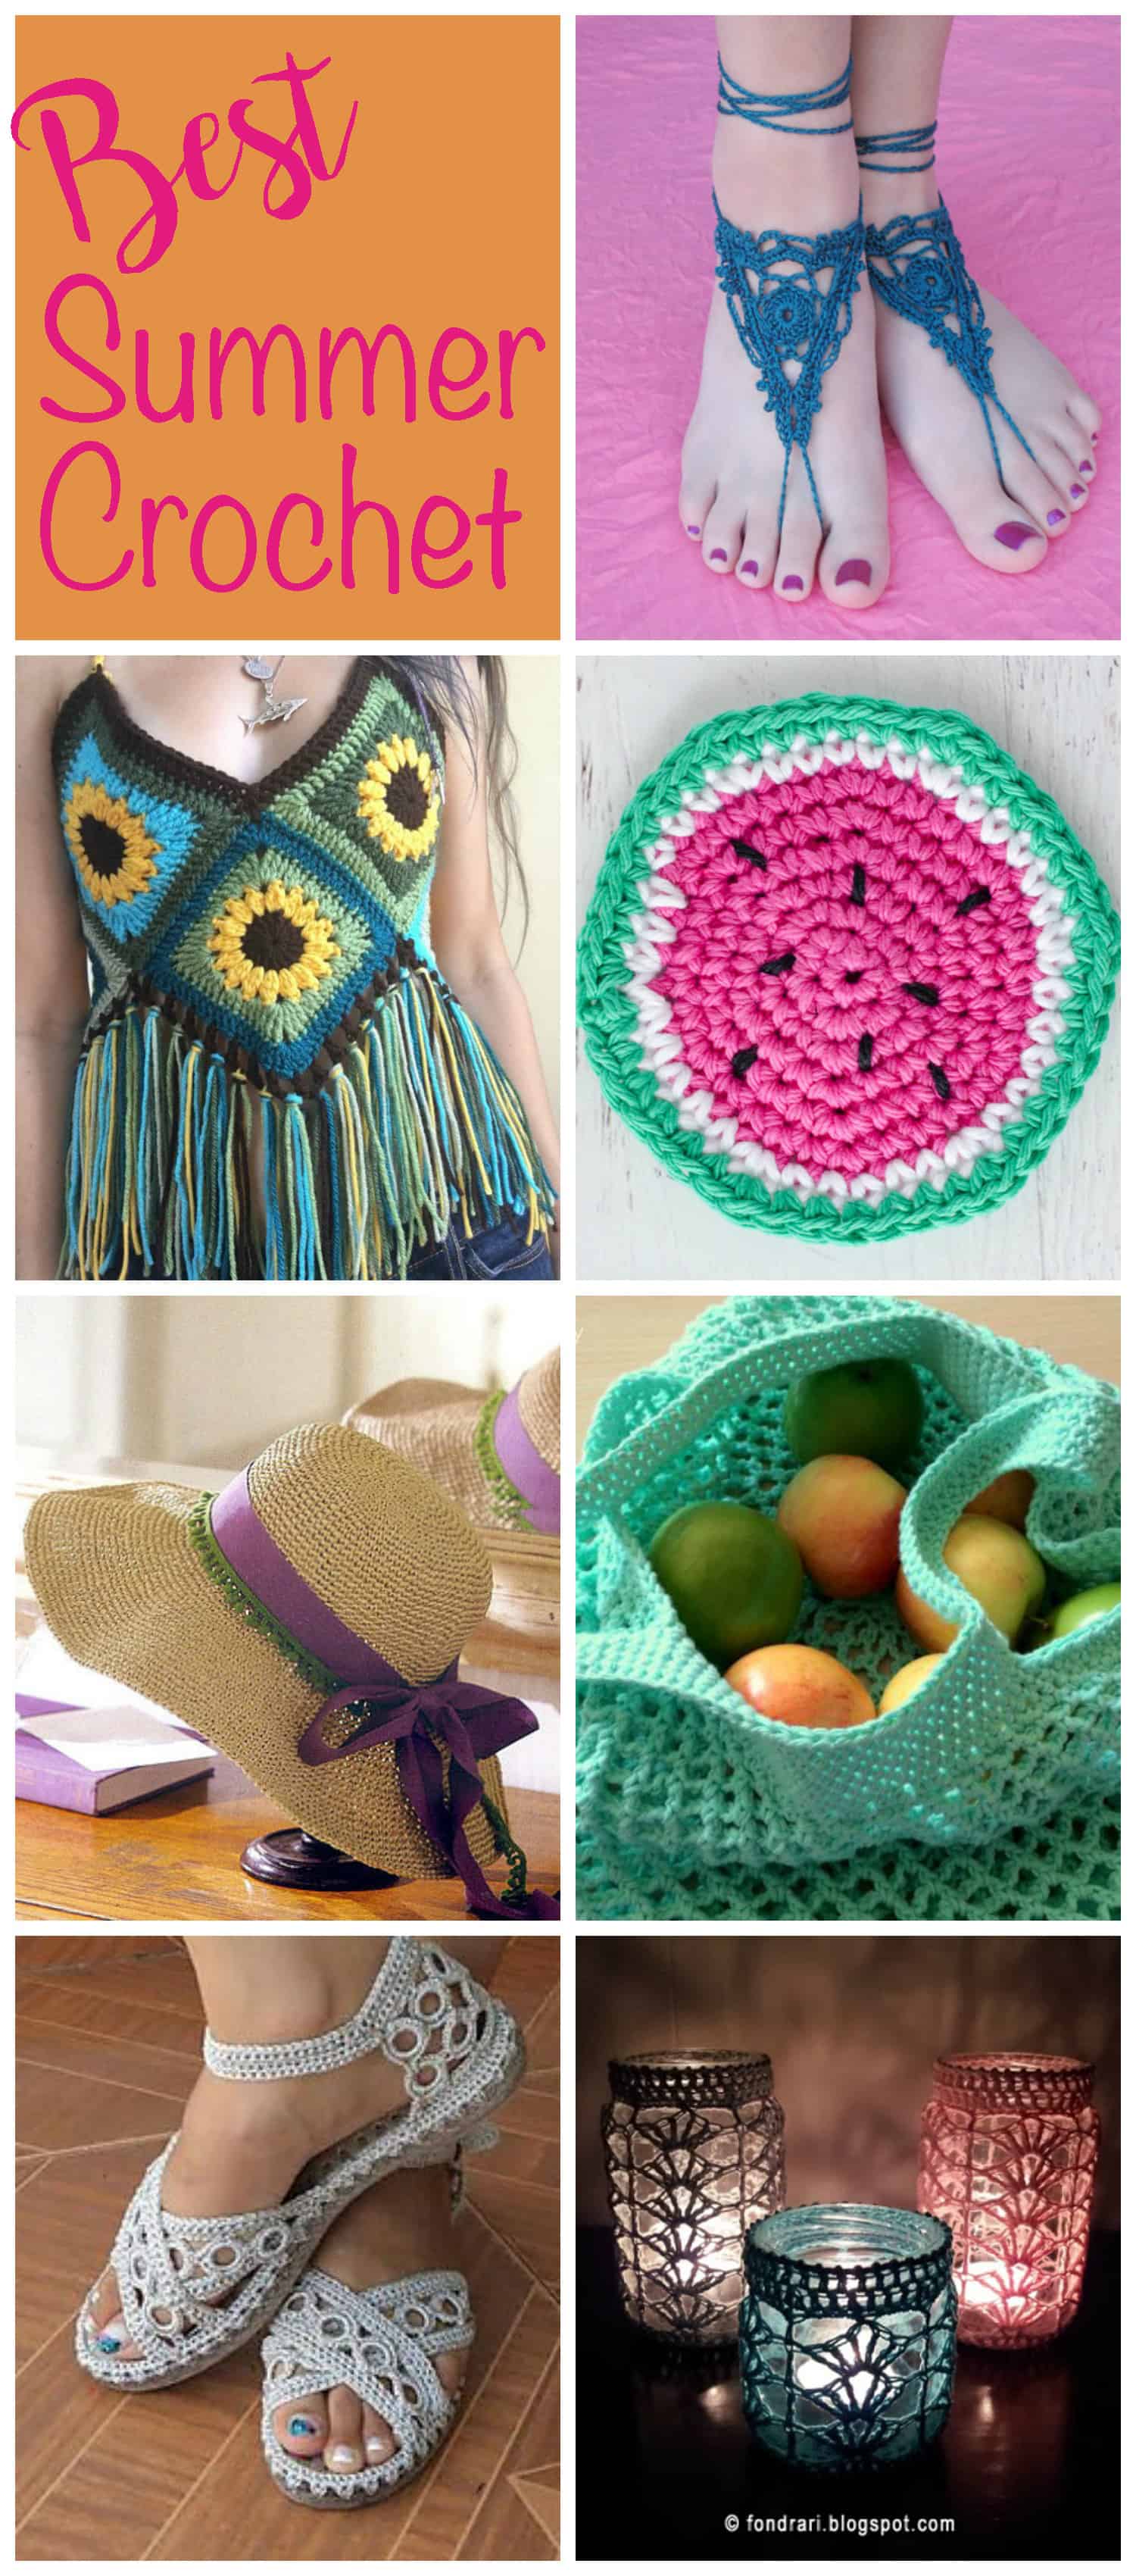 17 Crochet Projects for Summer